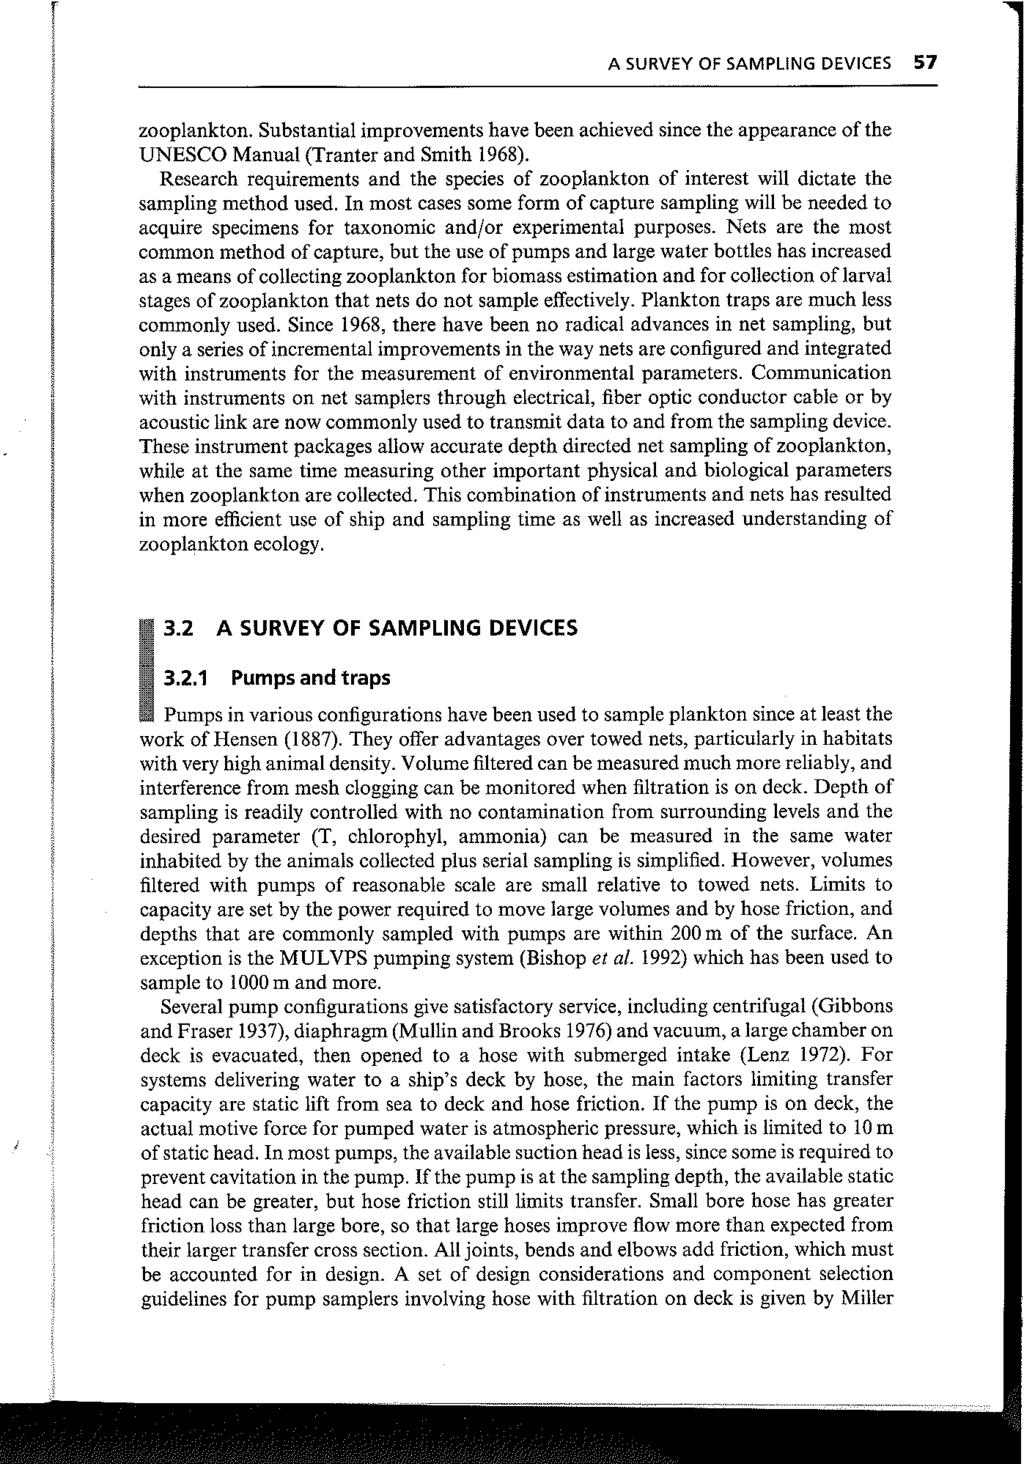 A SURVEY OF SAMPLING DEVICES 57 zooplankton. Substantial improvements have been achieved since the appearance of the UNESCO Manual (Tranter and Smith 1968).